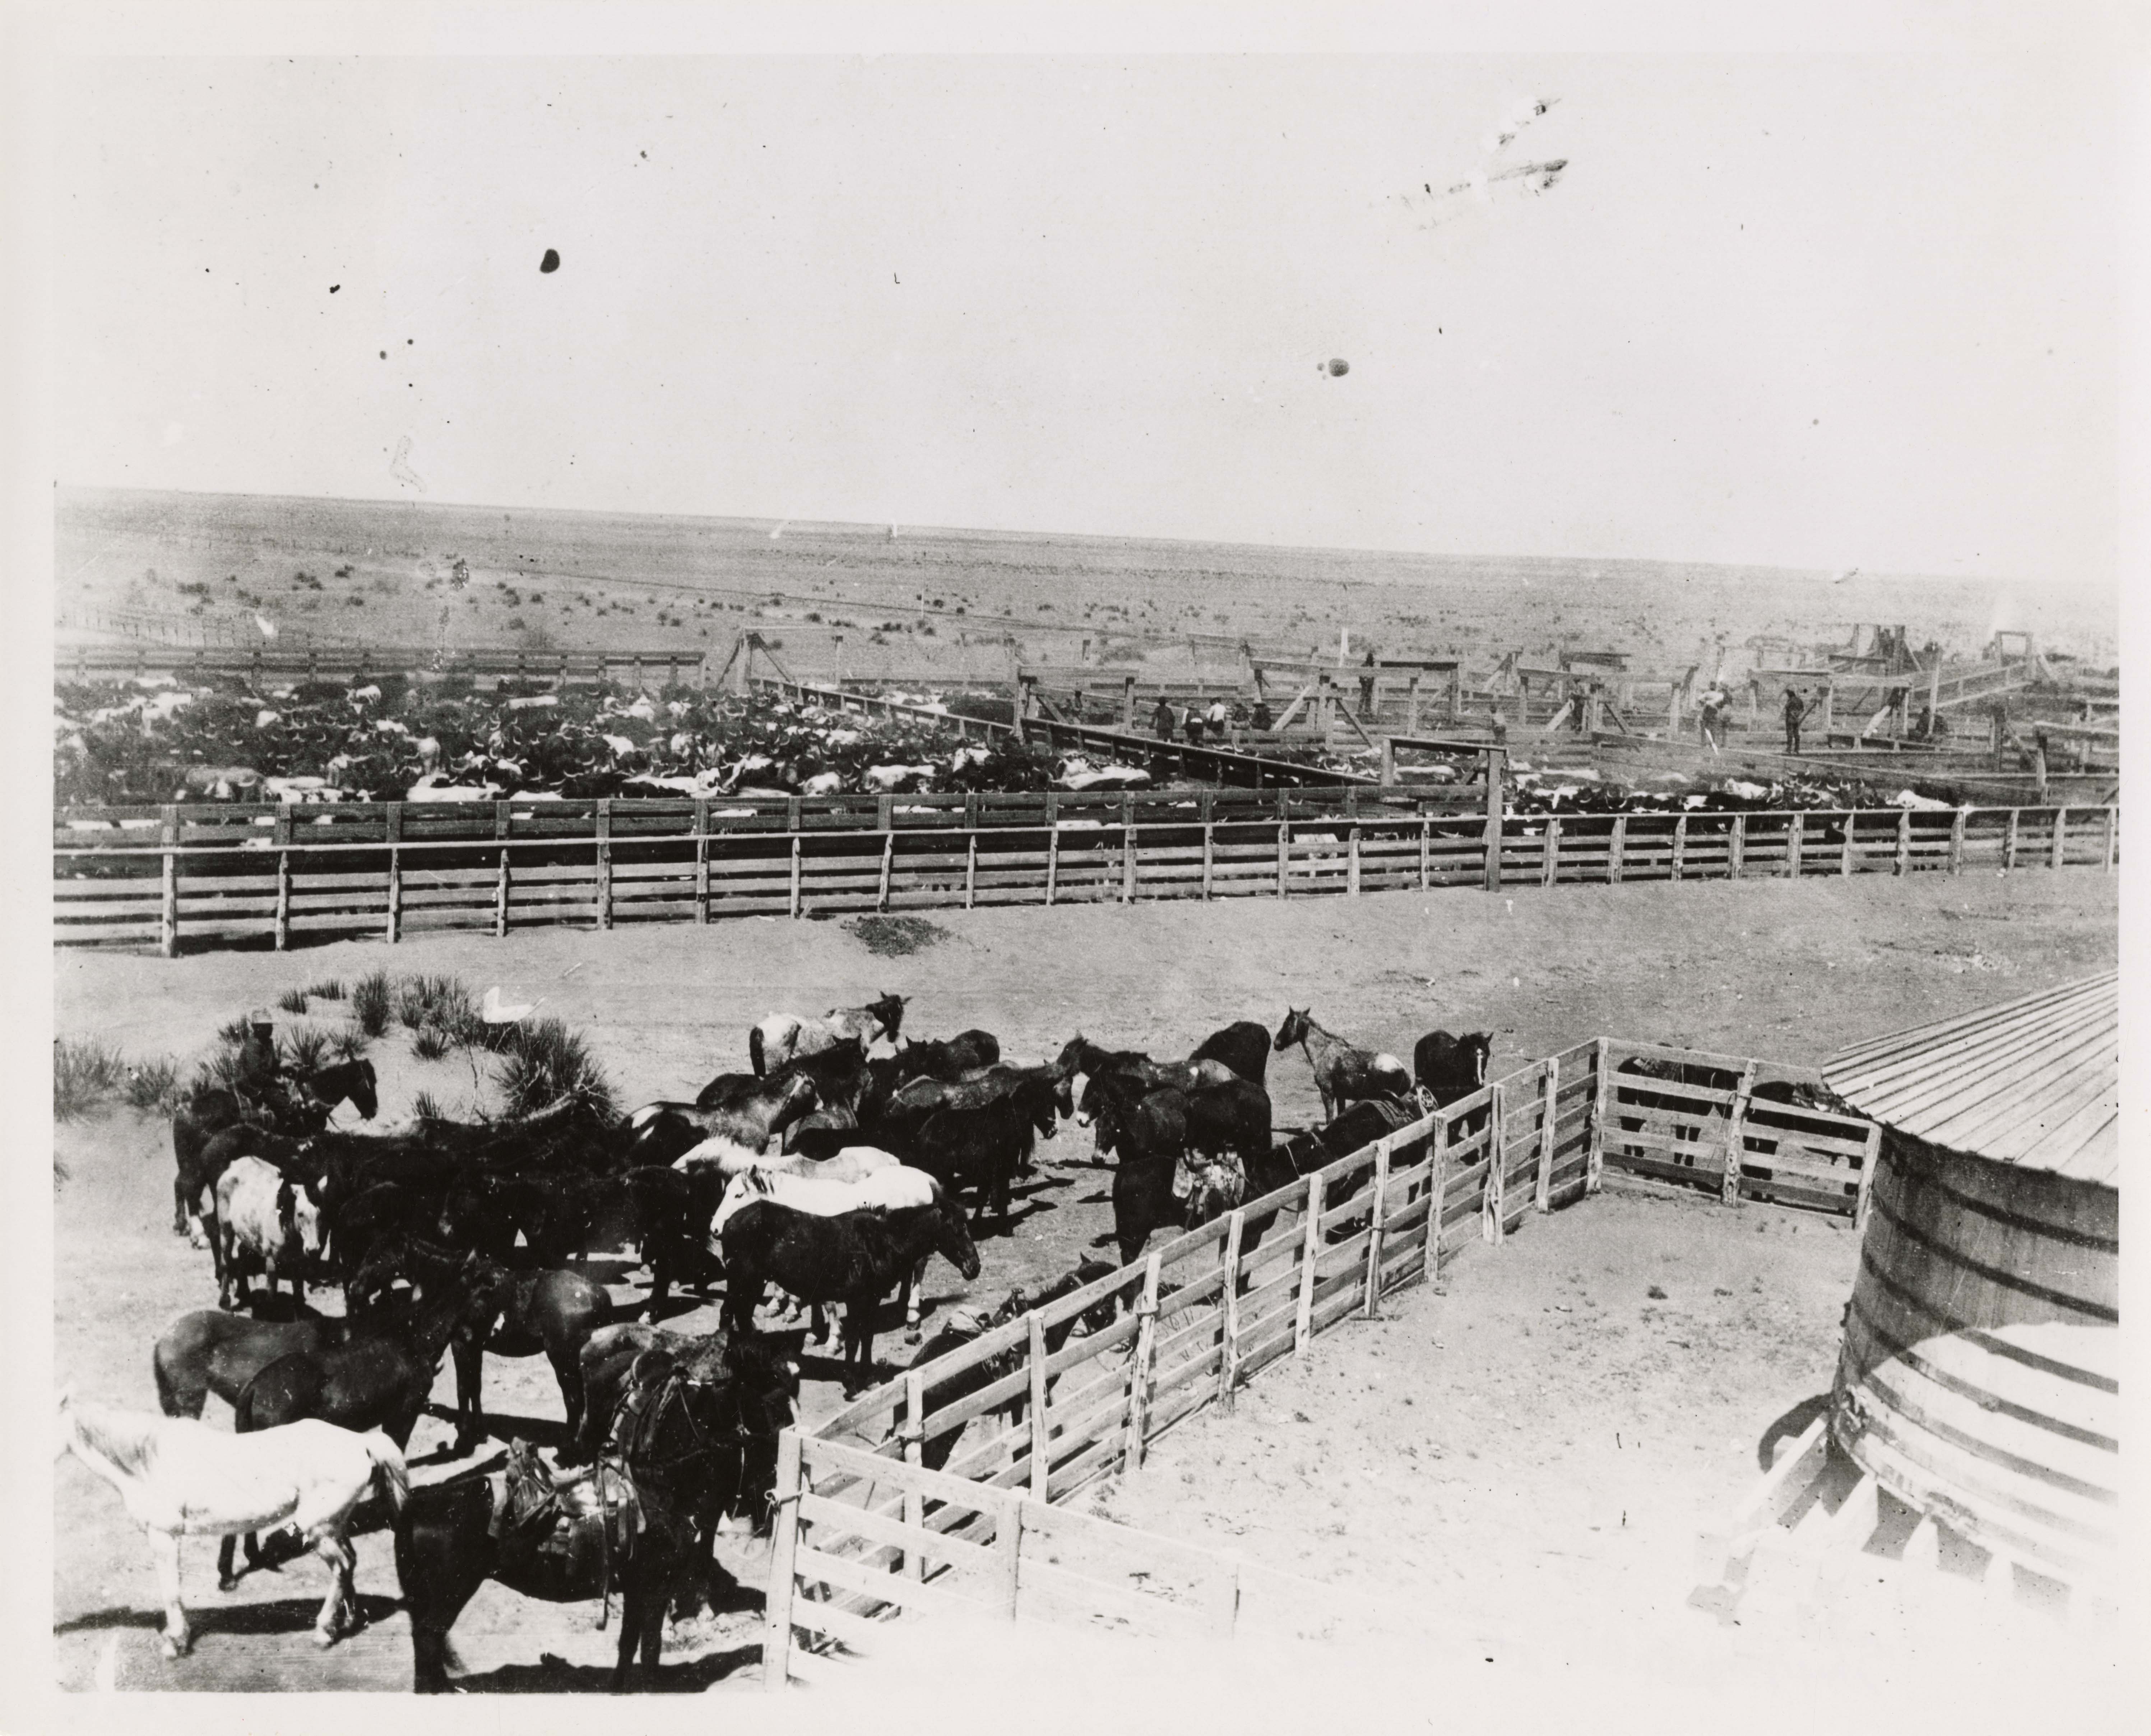 Shipping cattle at Midland, Texas for M. Wolff and brothers